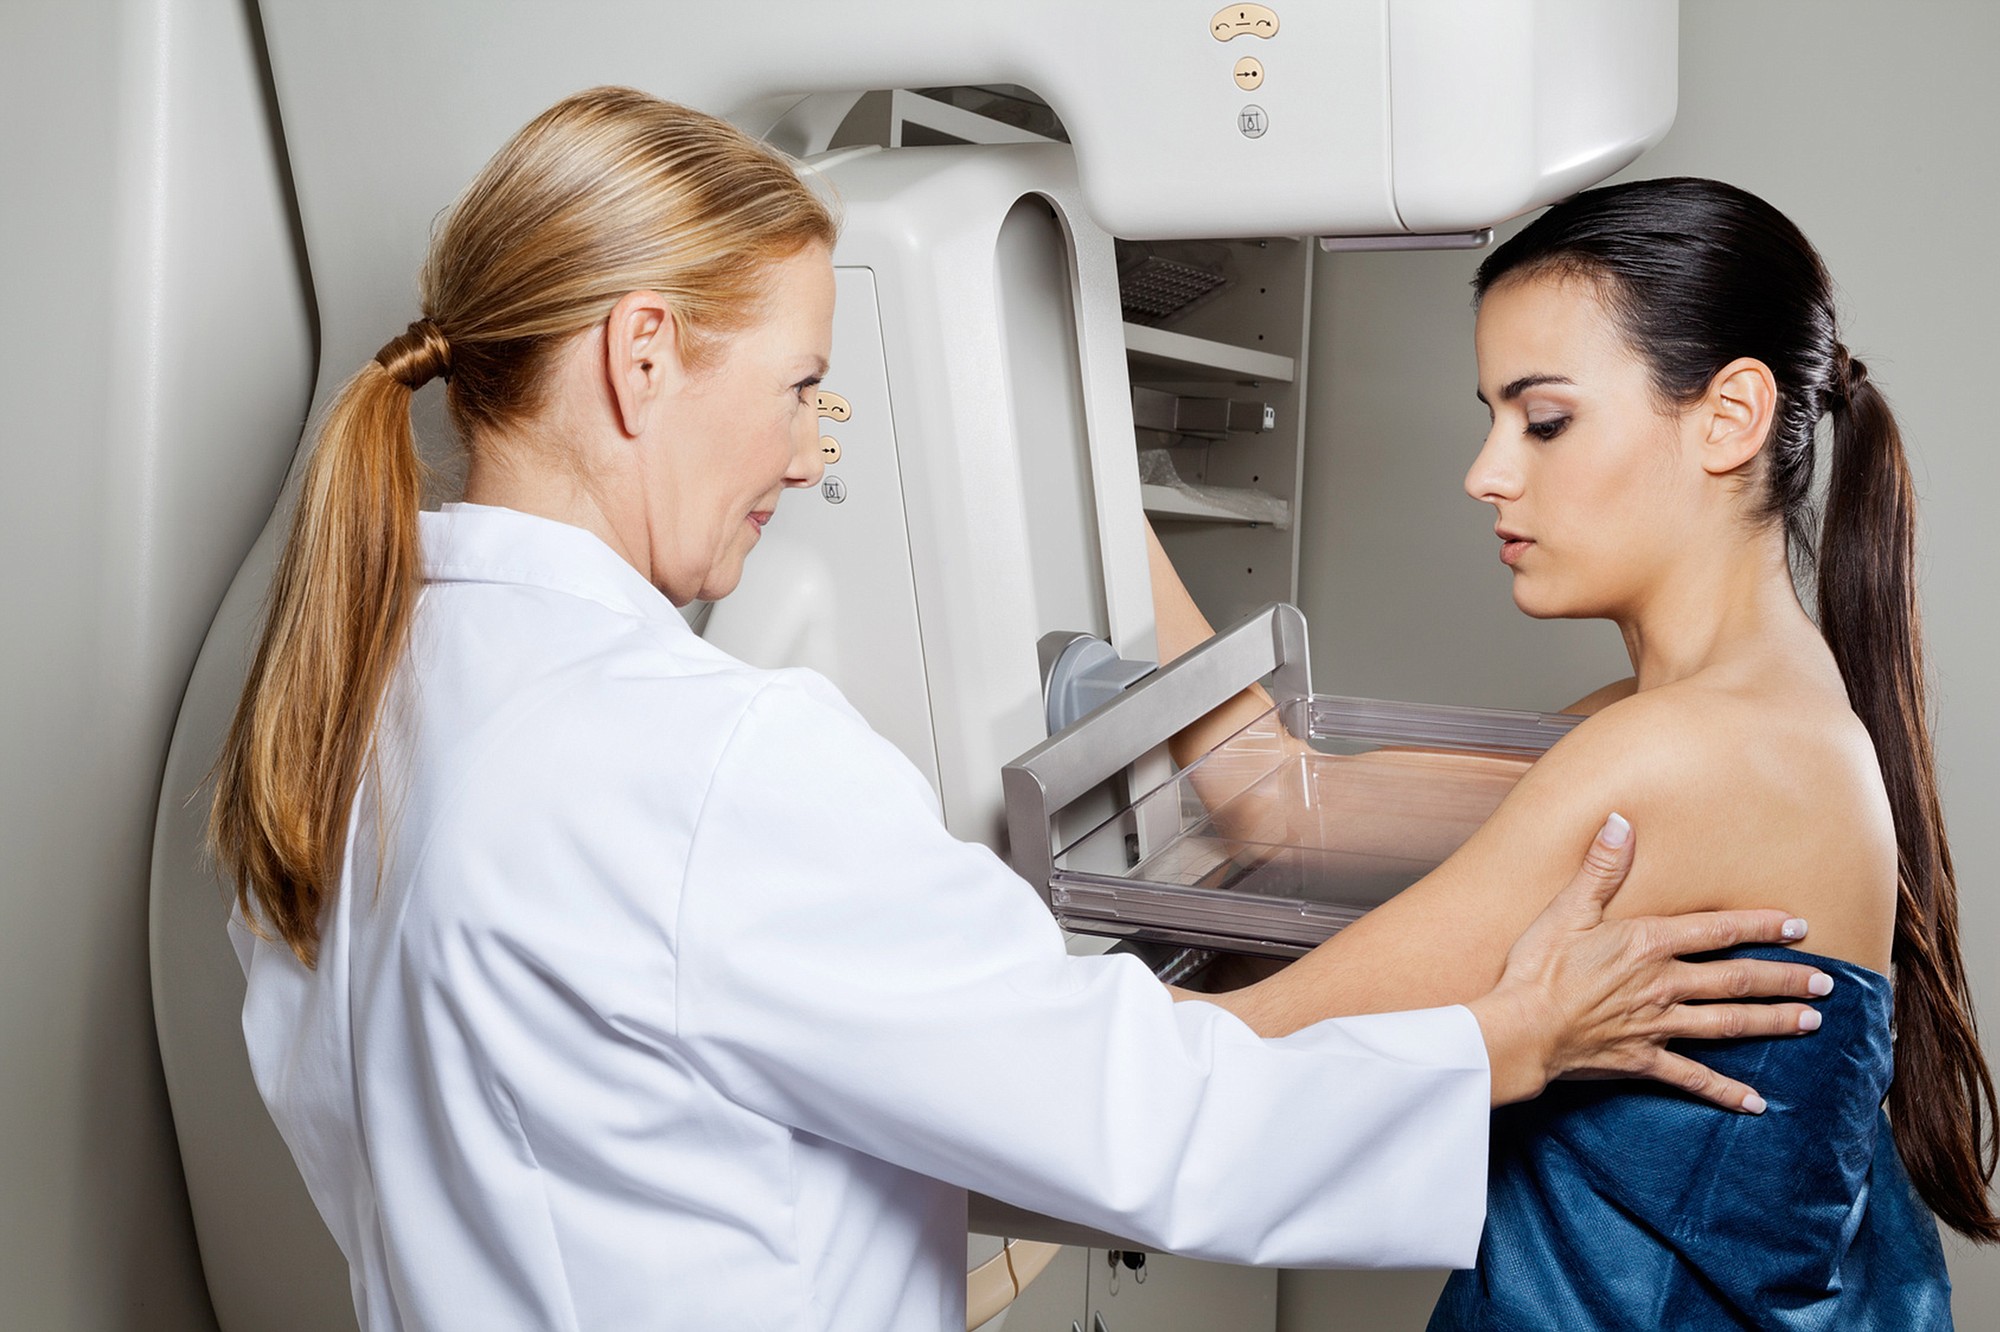 A number of important screening tests, including mammograms, can help protect against cancer.